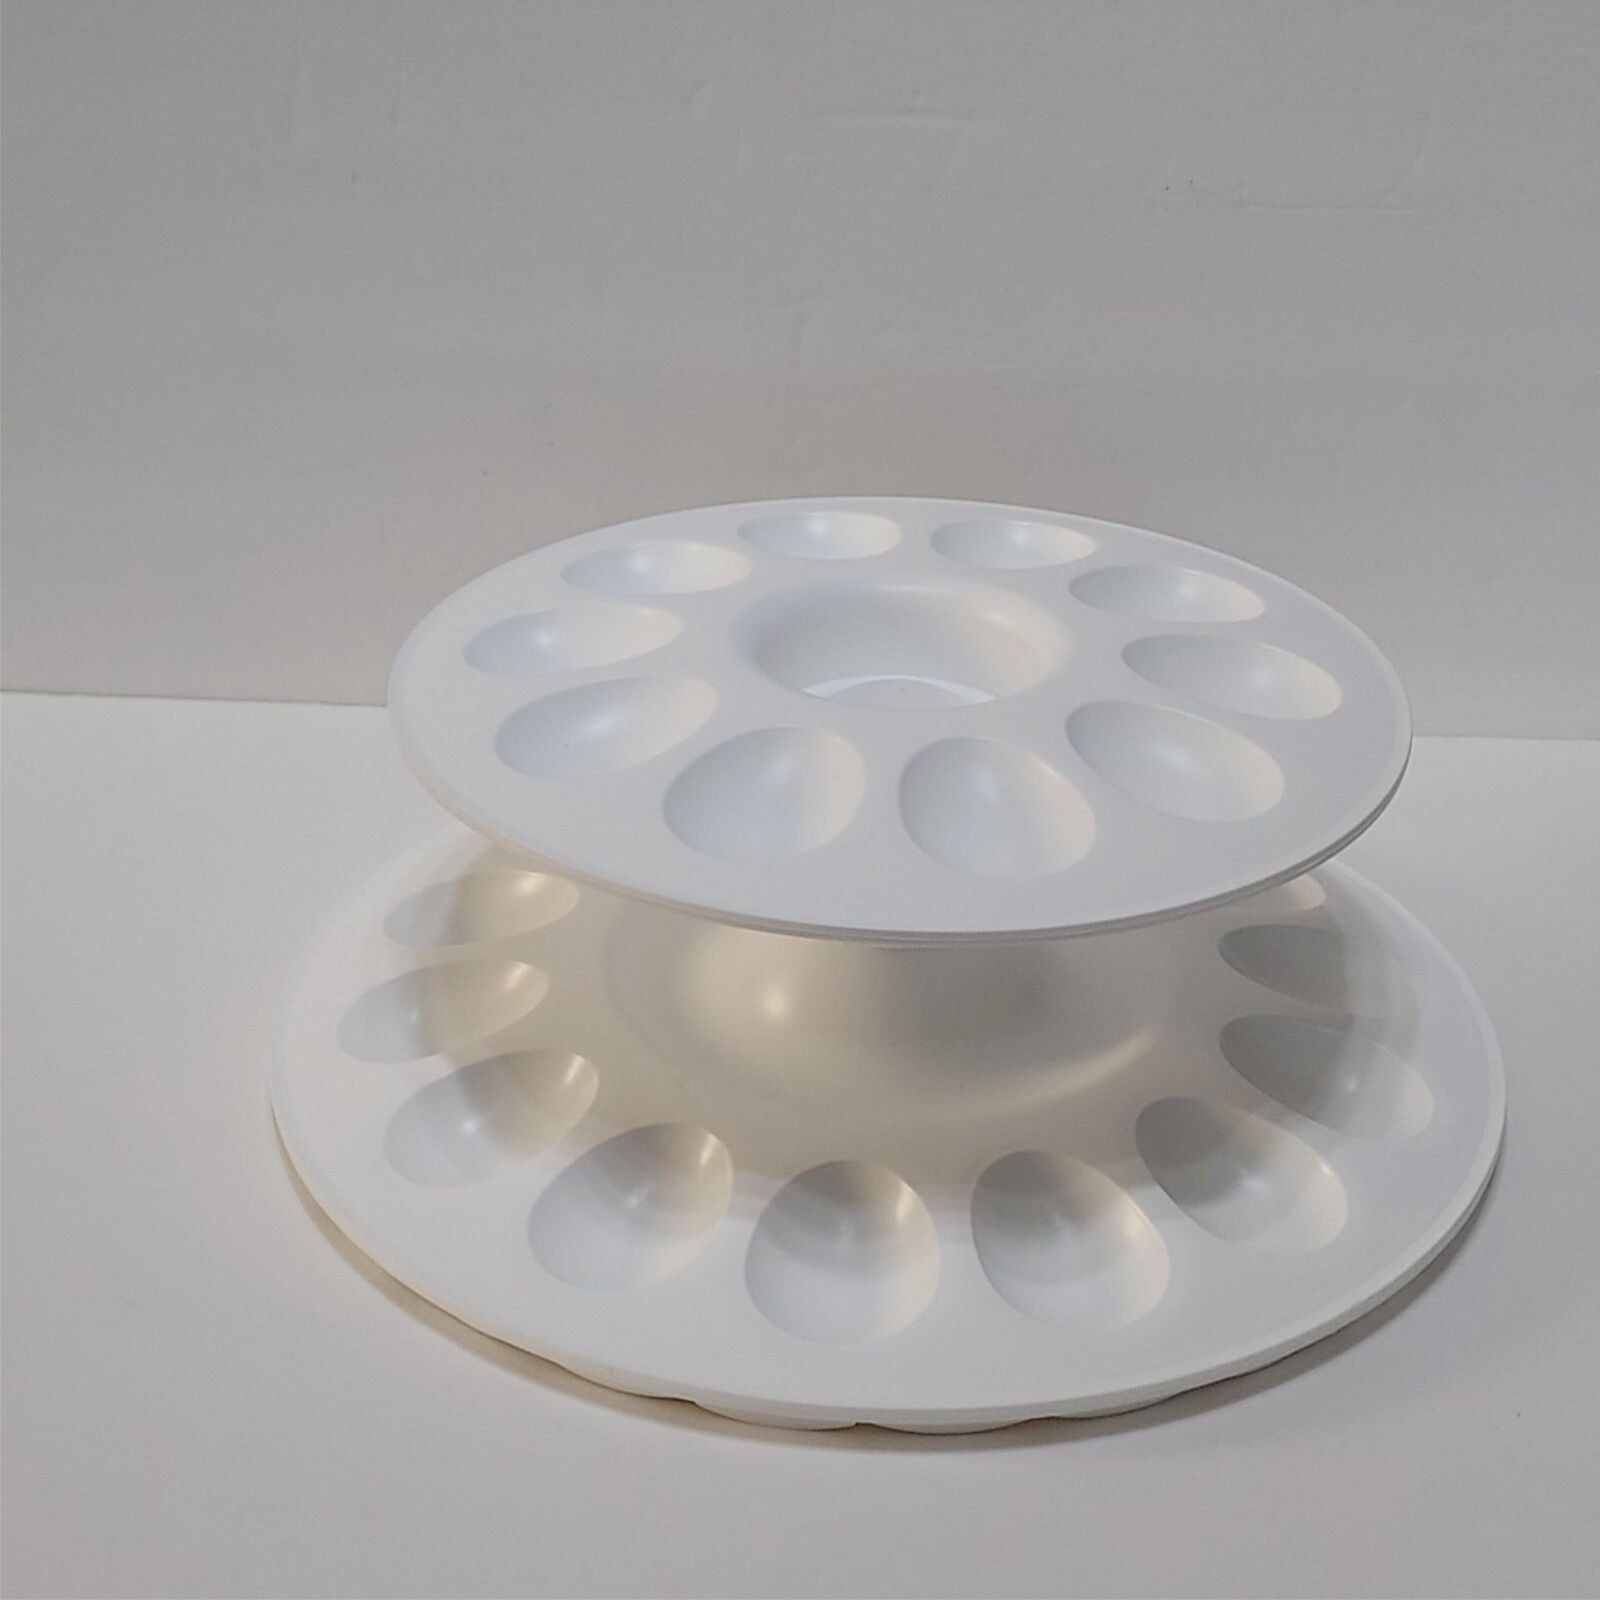 White Tupperware Deviled Egg 2 Piece Tiered Tray Set  24 Eggs 3984A1 & 3985A1